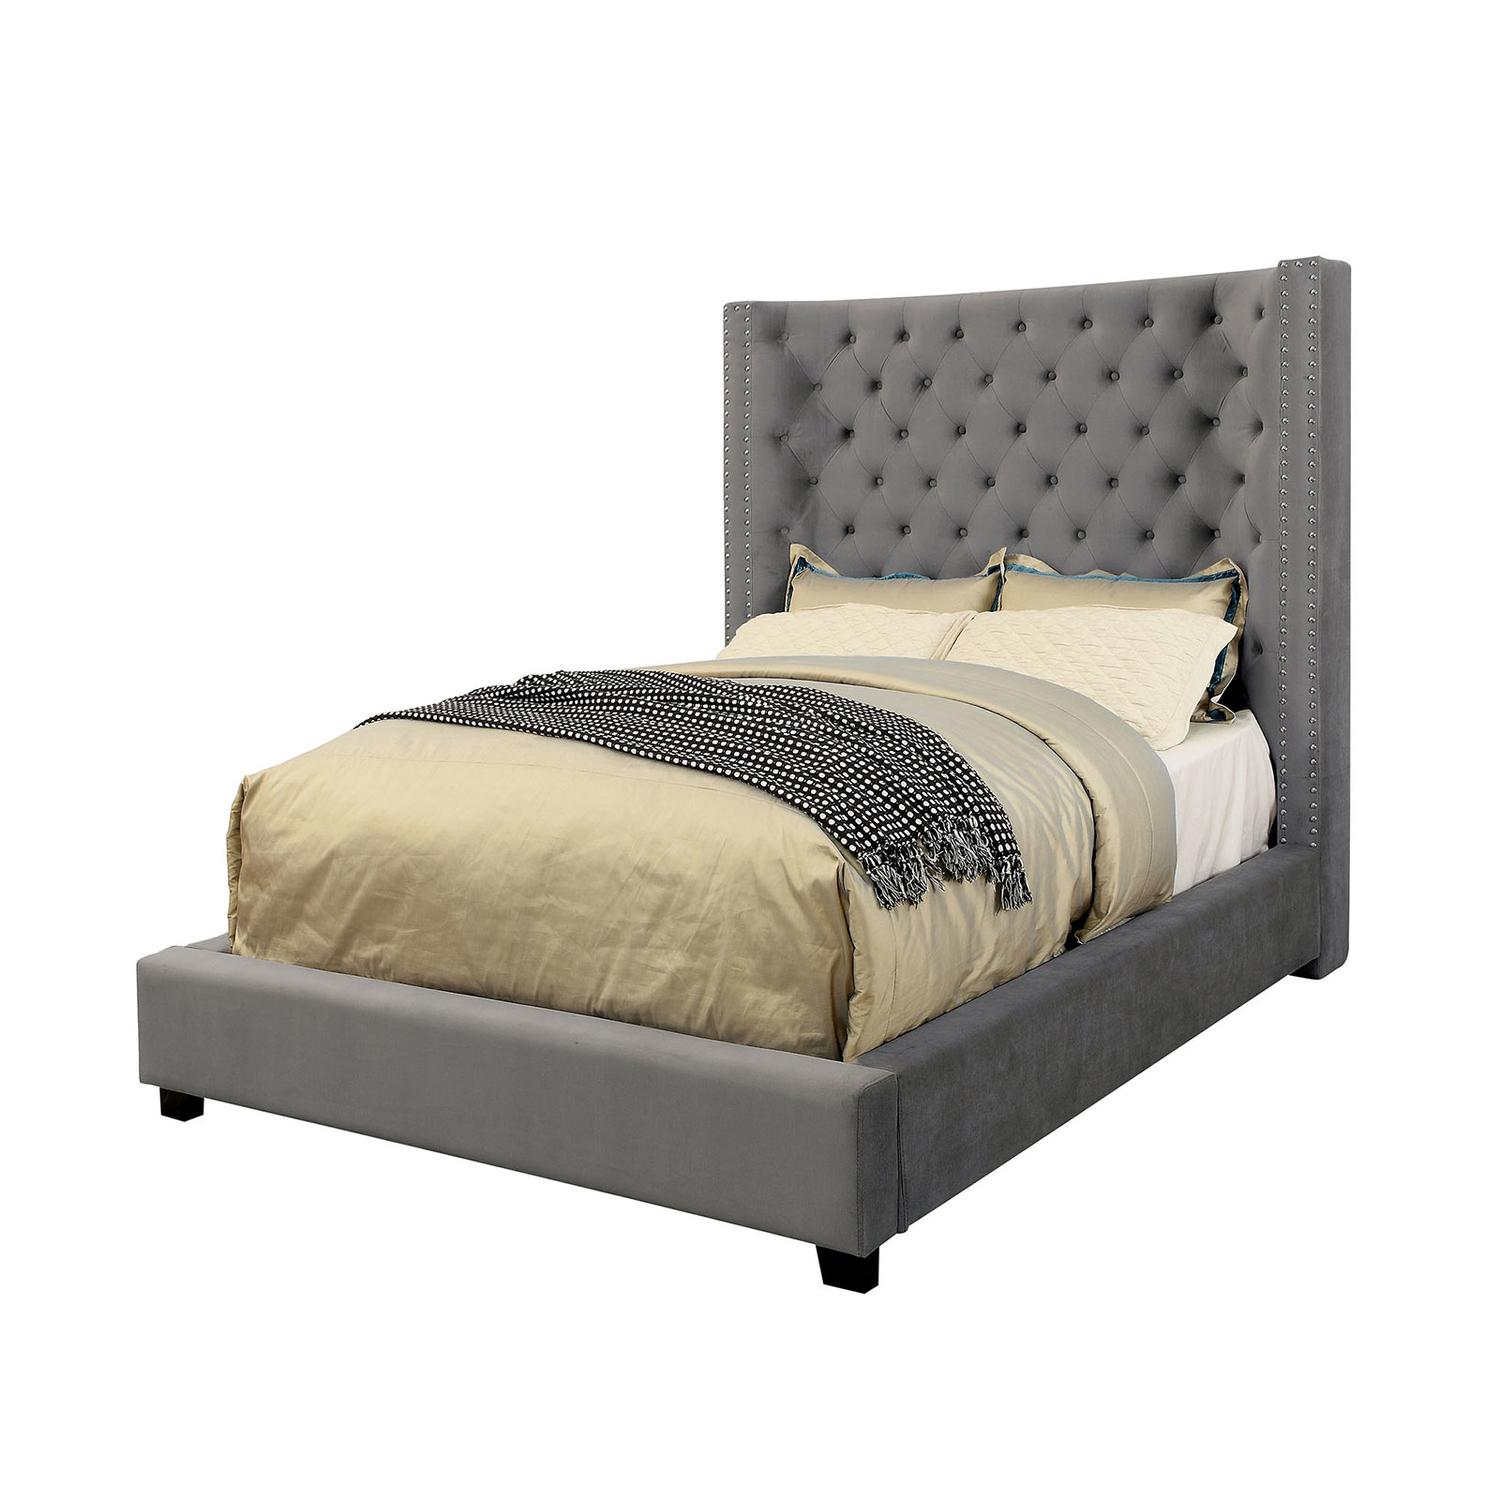 Transitional Platform Bed CM7679GY-Q Mirabelle CM7679GY-Q in Gray 